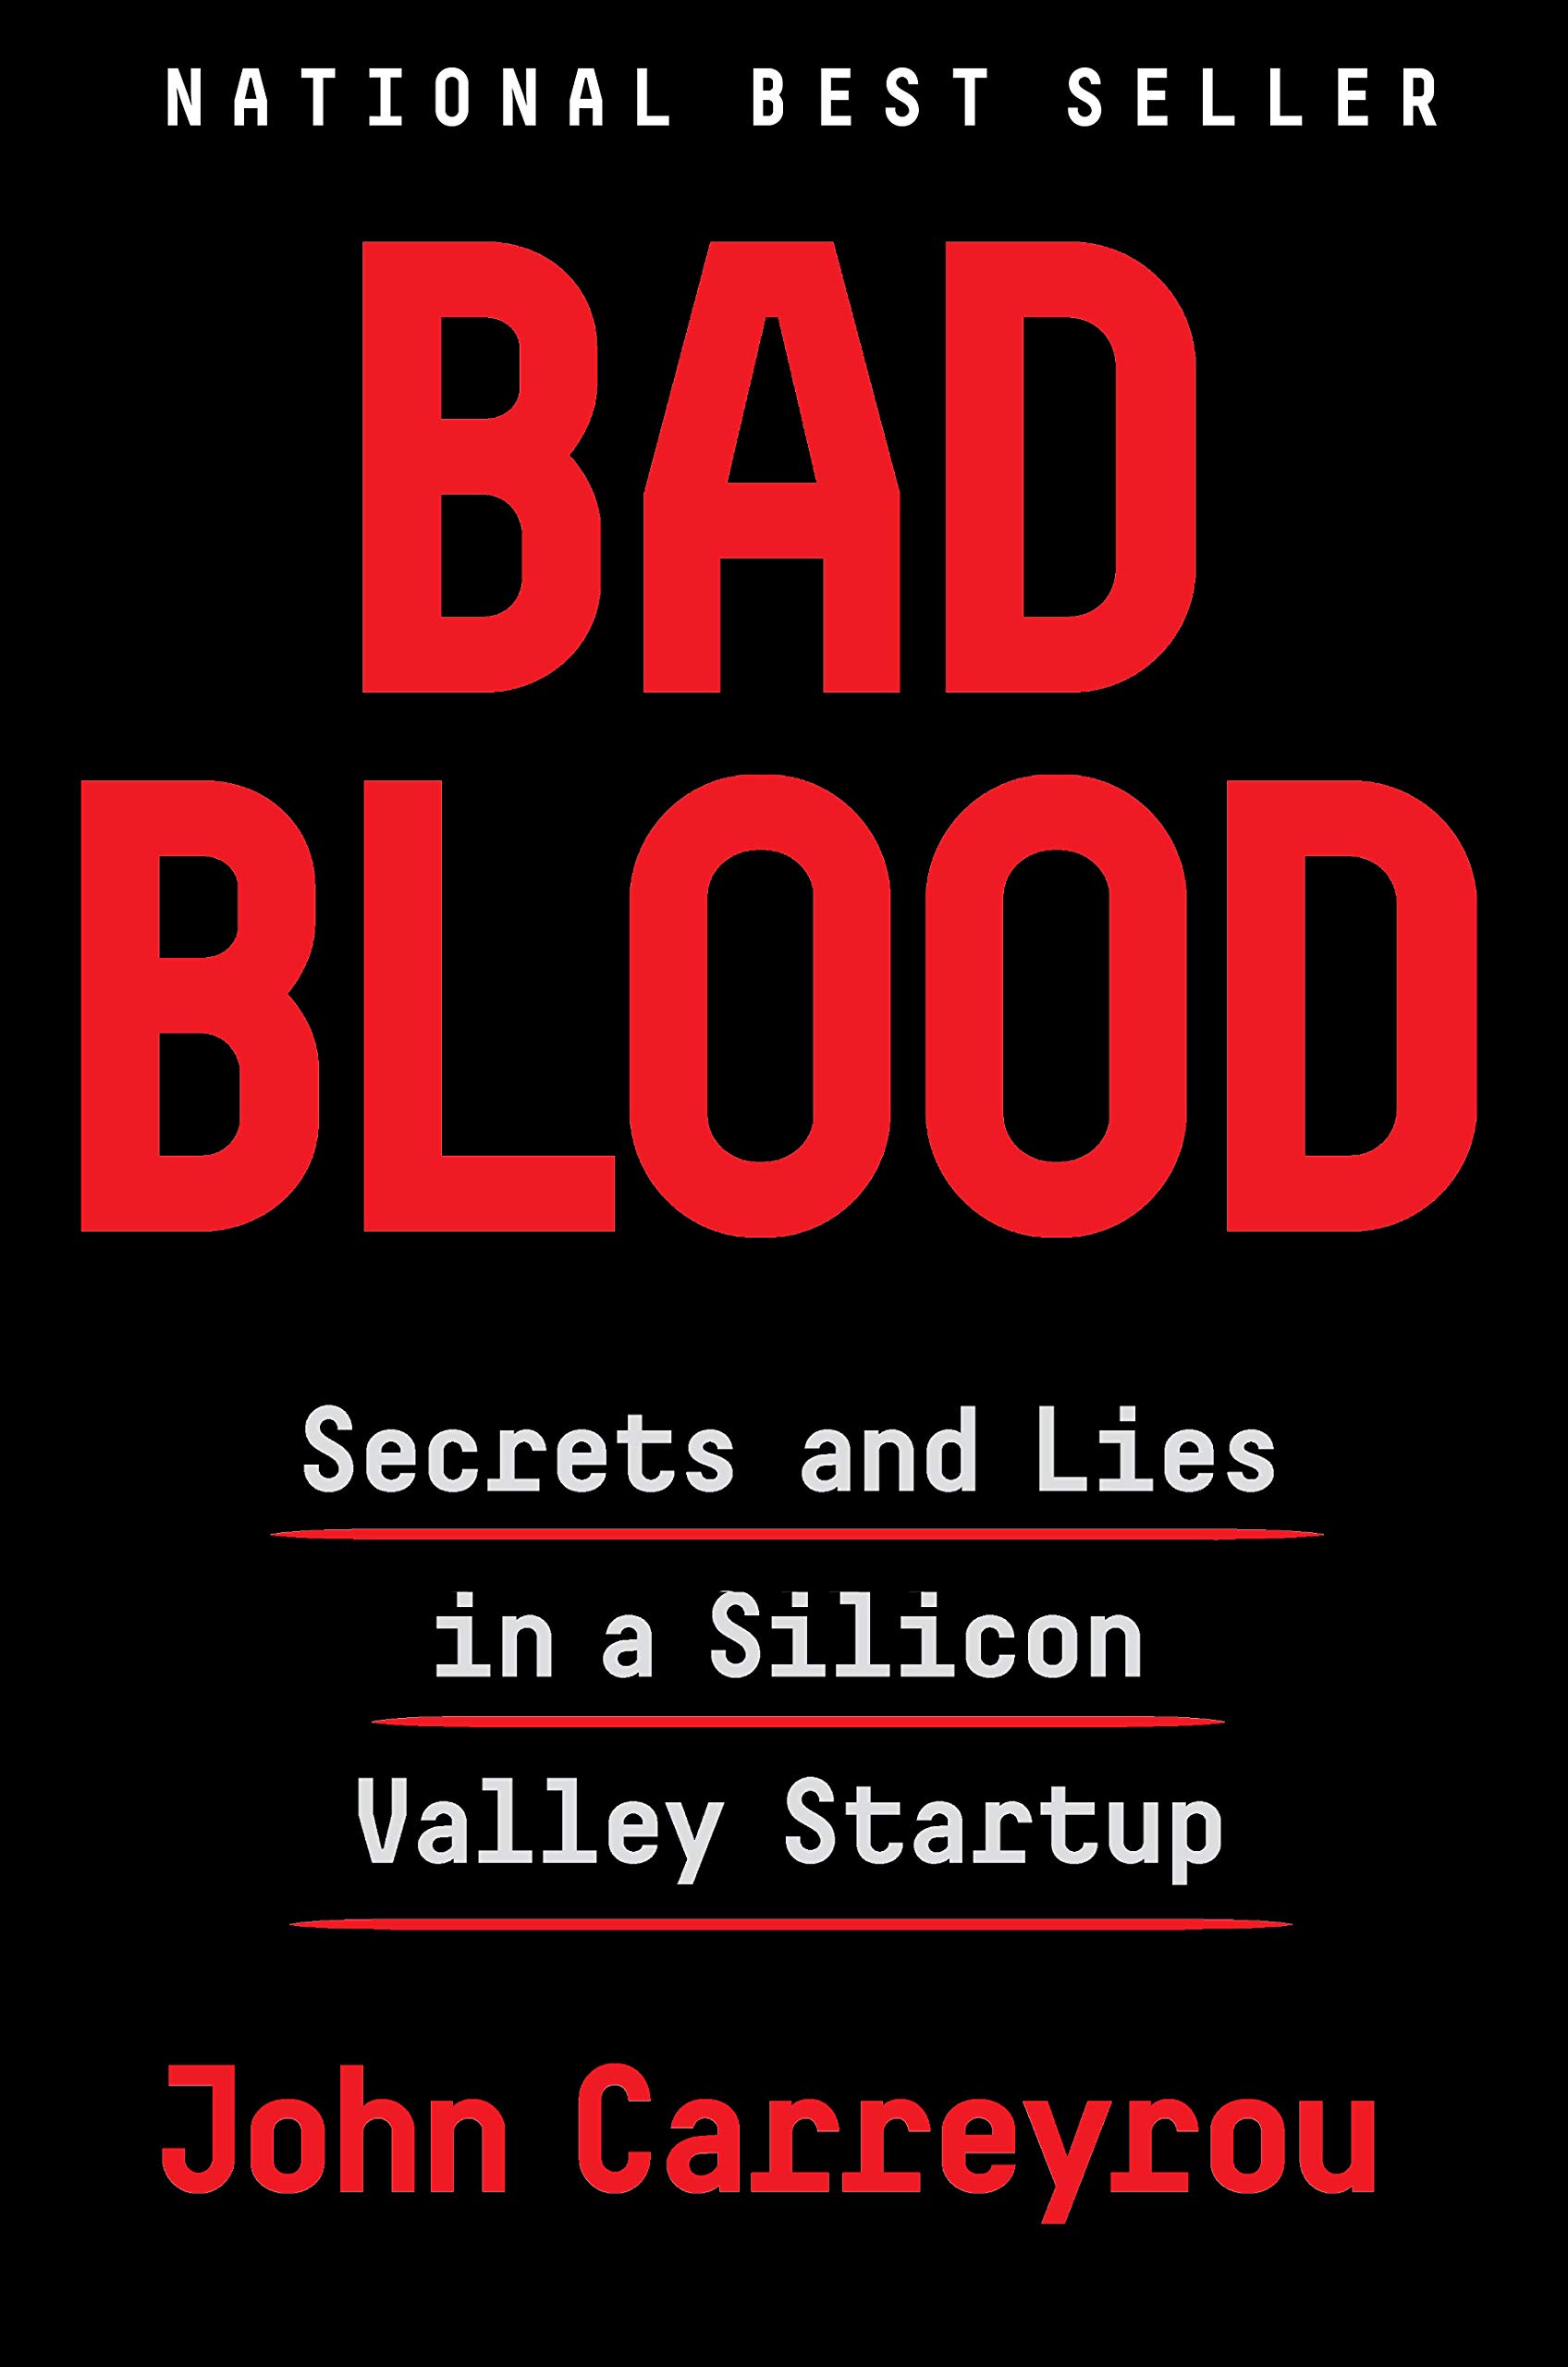 Cover of "Bad Blood" by John Carreyrou